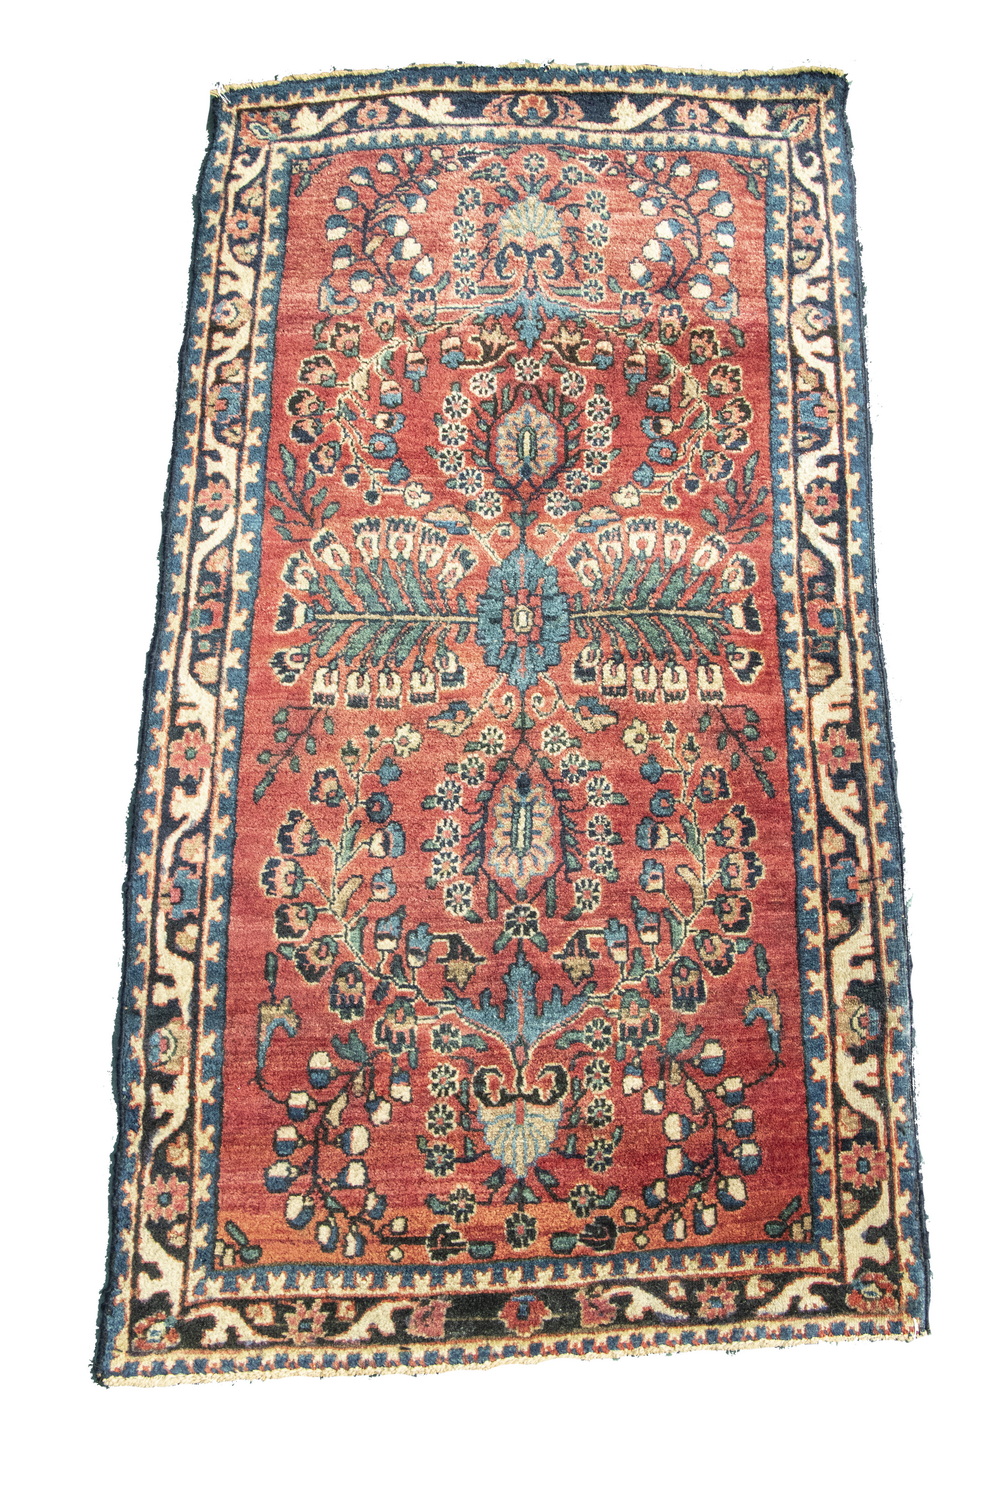 SAROUK RUG Overall design of floral 30203c